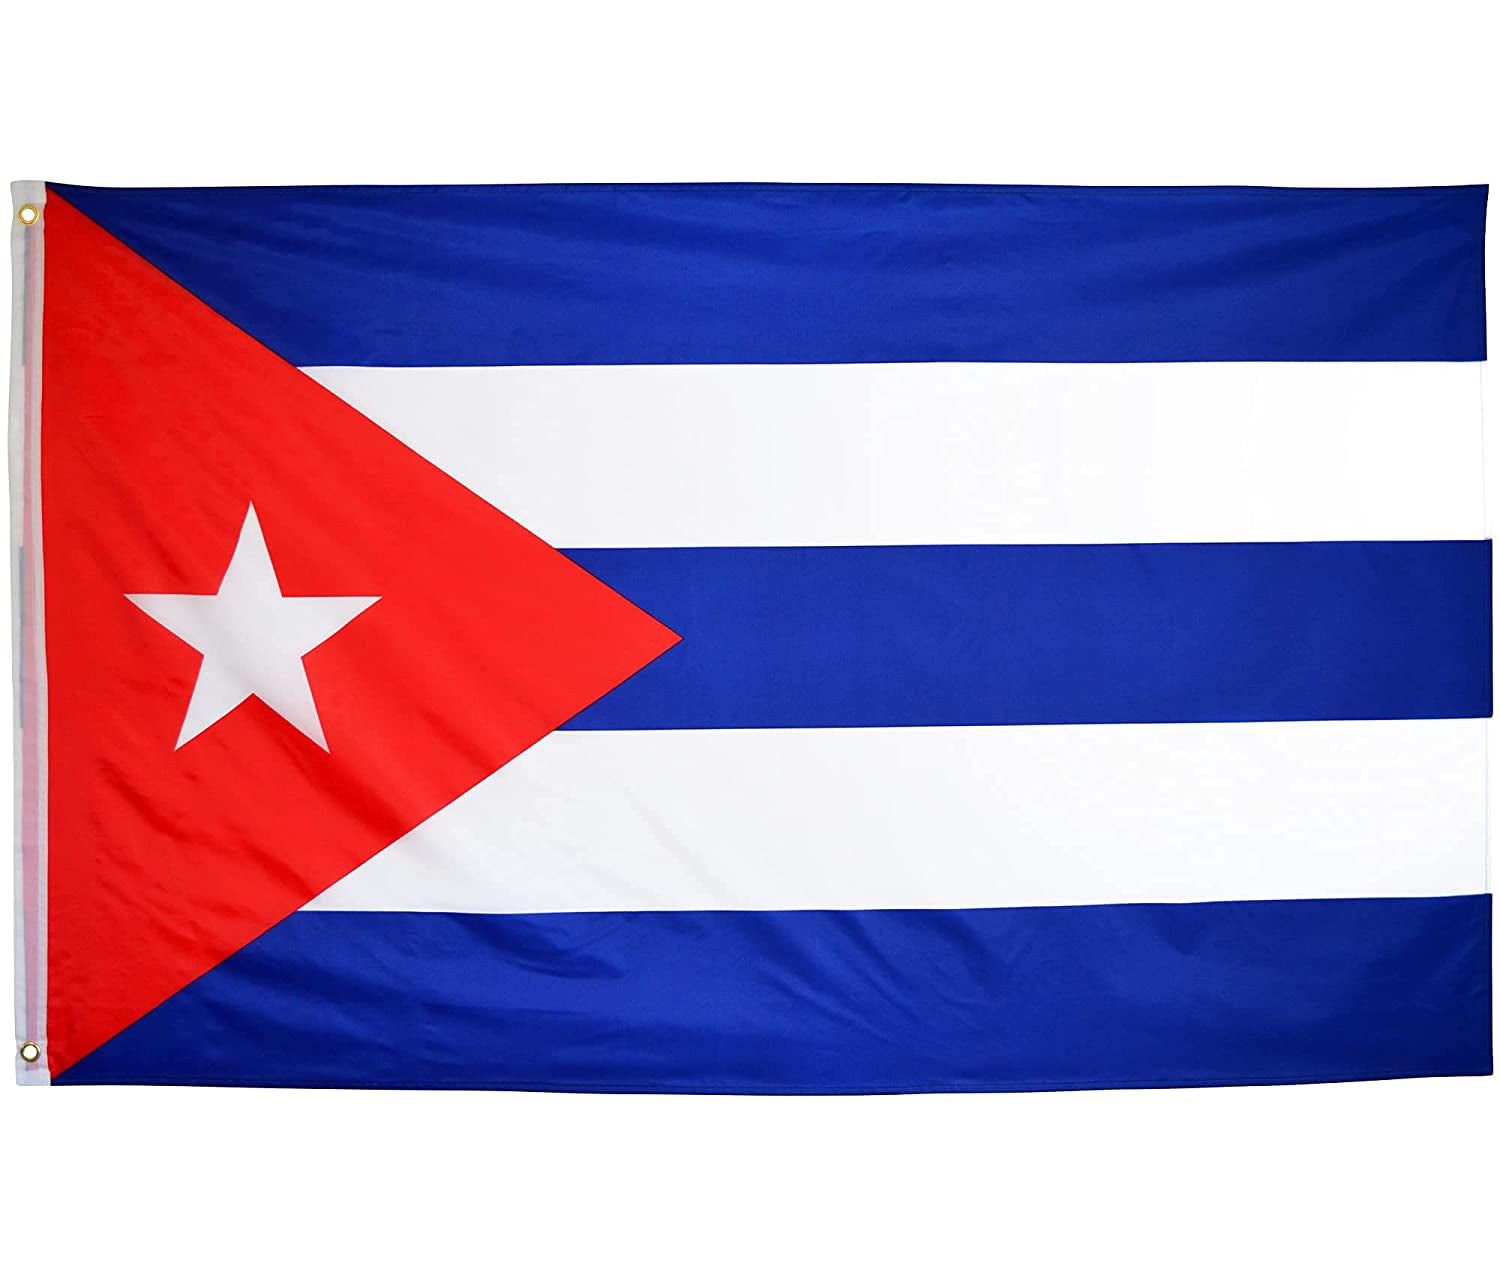 Eugenys, Eugenys Cuba Flag 3X5 Foot - Cuban National Flag Polyester -Bright Vivid Colors, Double Stitched, Durable Brass Grommets - Perfect Cuban Flags for Indoor / Outdoor